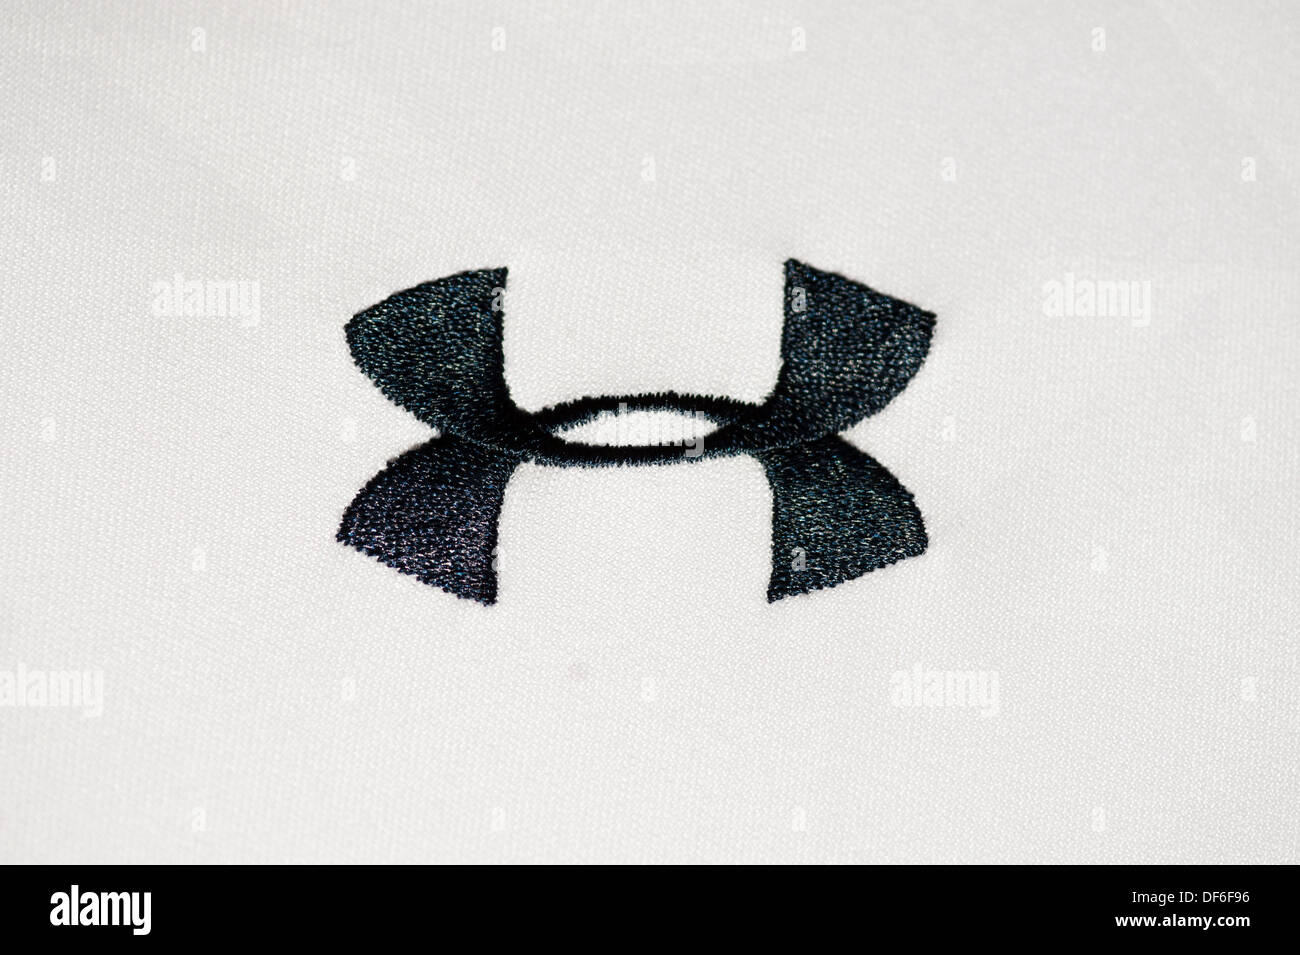 Under armour hi-res stock photography and images - Alamy